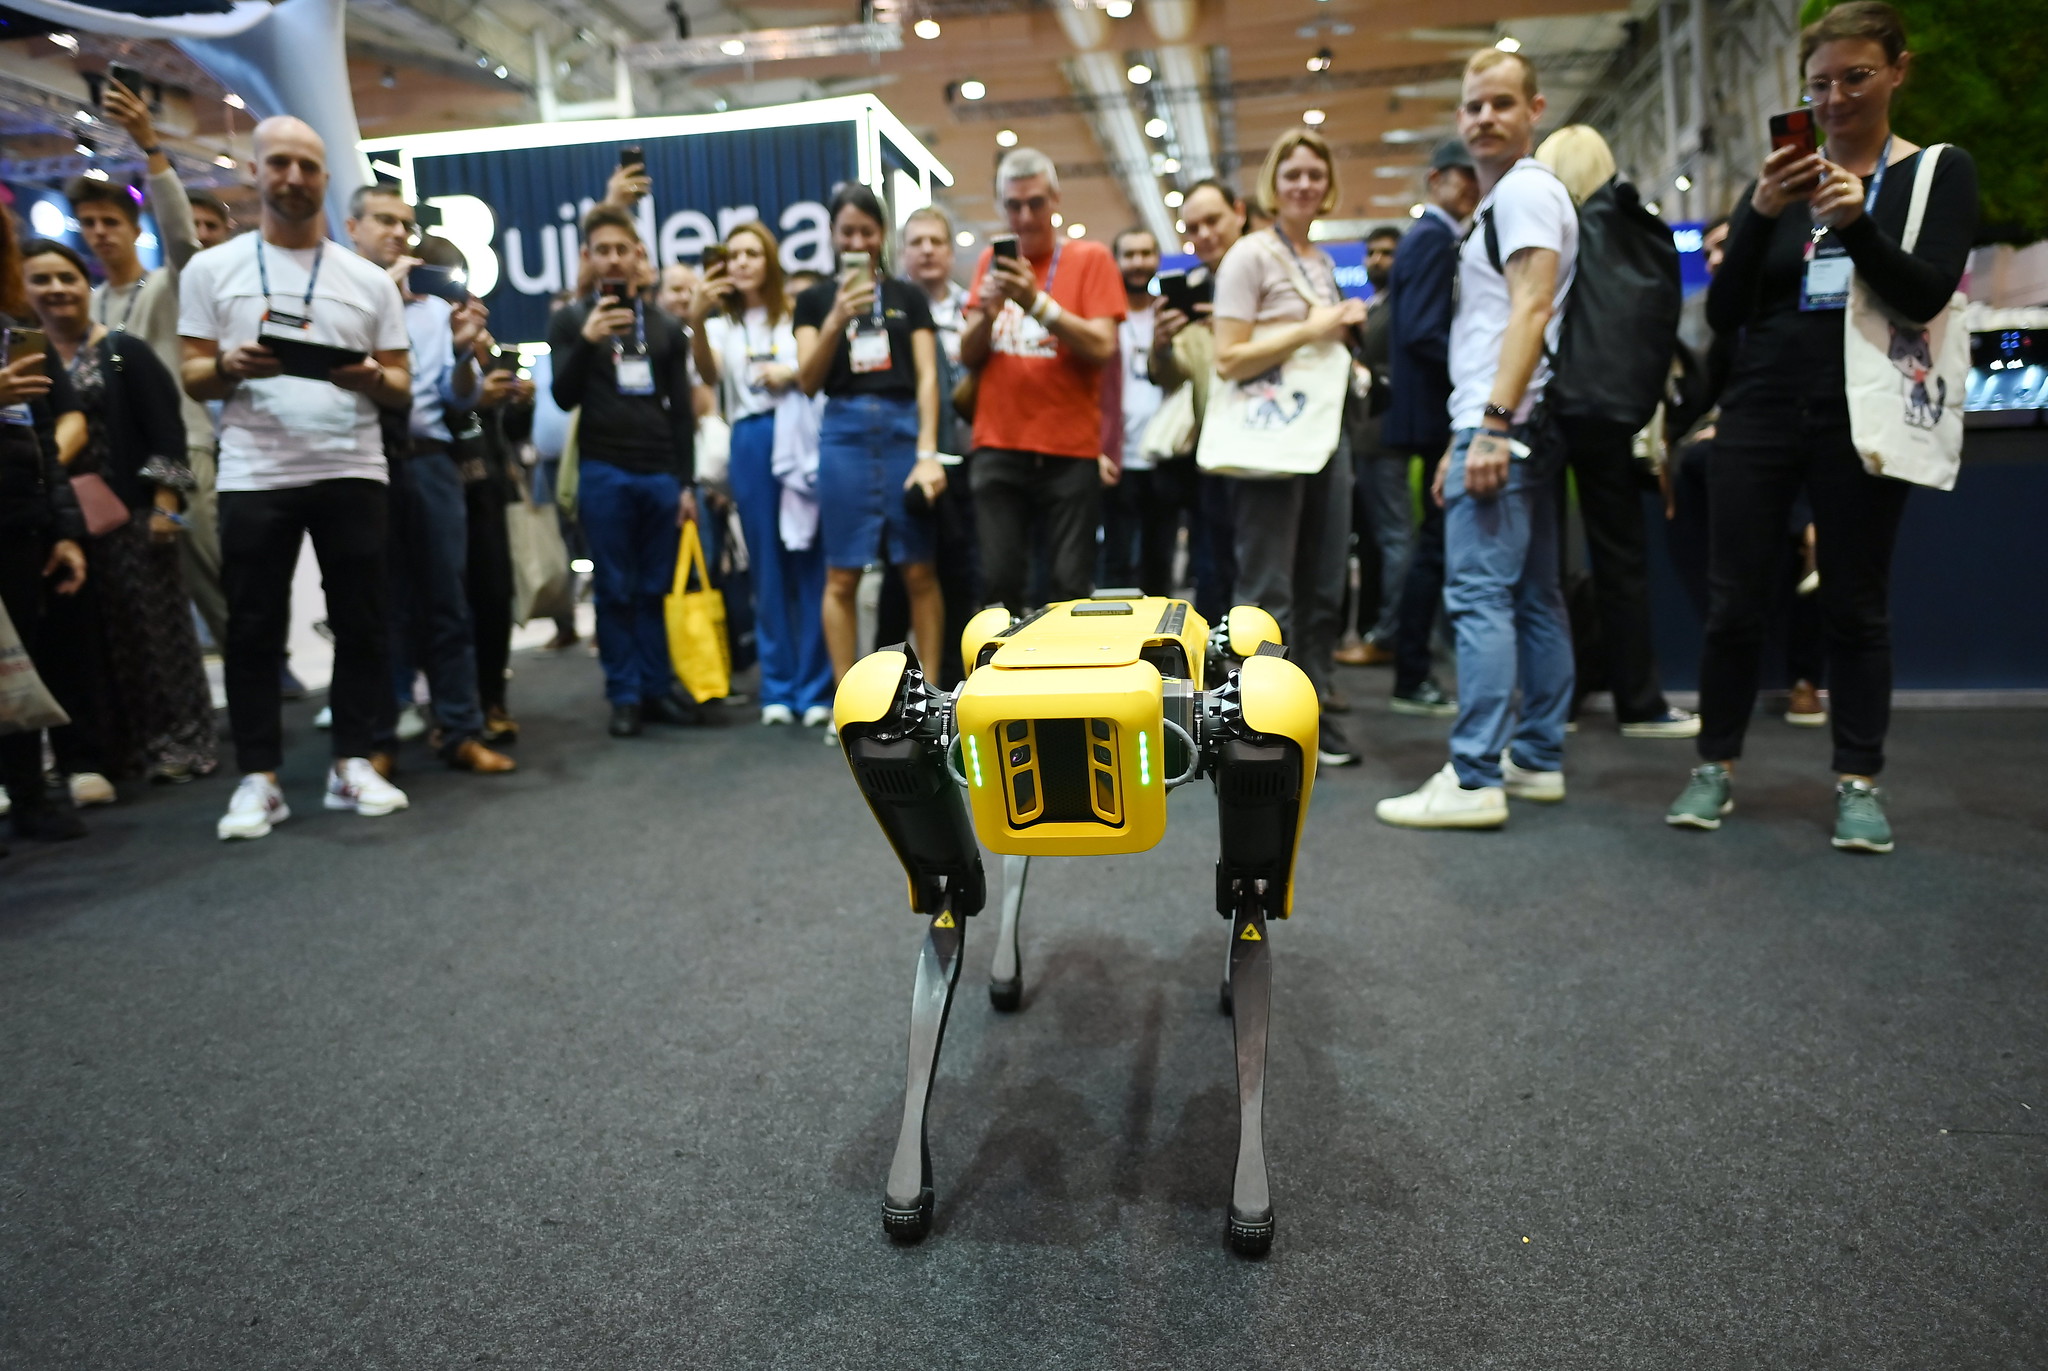 Spot, the Boston Dynamics robot, stands in the foreground. The robot is surrounded by a crowd of people, some of whom are taking photos.